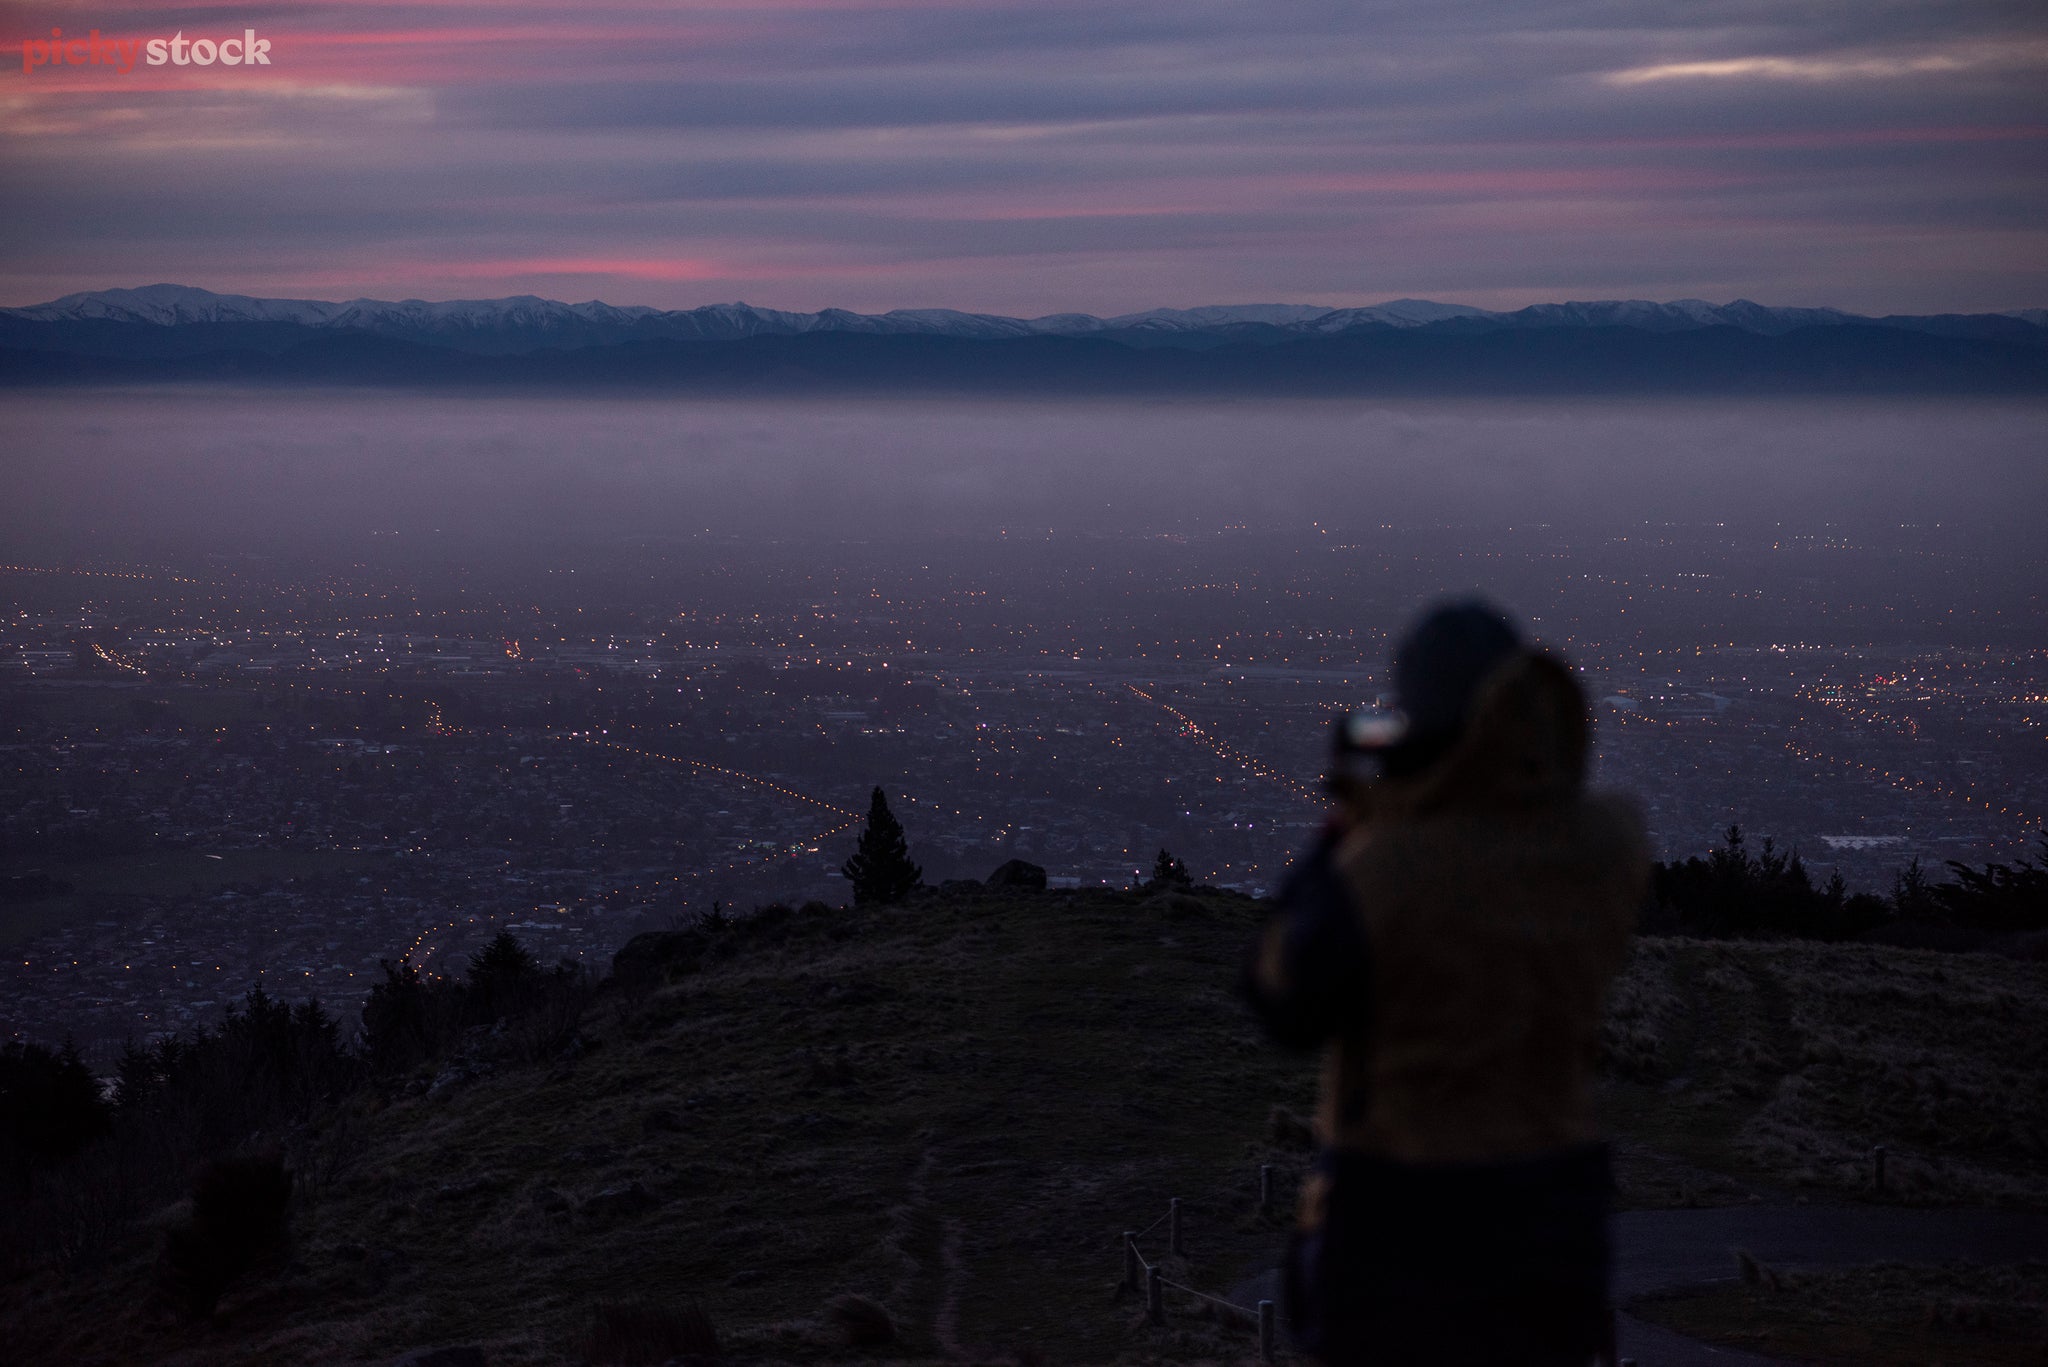 A very hazy and dark viewpoint from the Moody Port Hills overlooking Christchurch. In the far distance the purple and pink dark sunsetting just breaks up the night sky. The silhouette of a person breaks the scene to the right. 